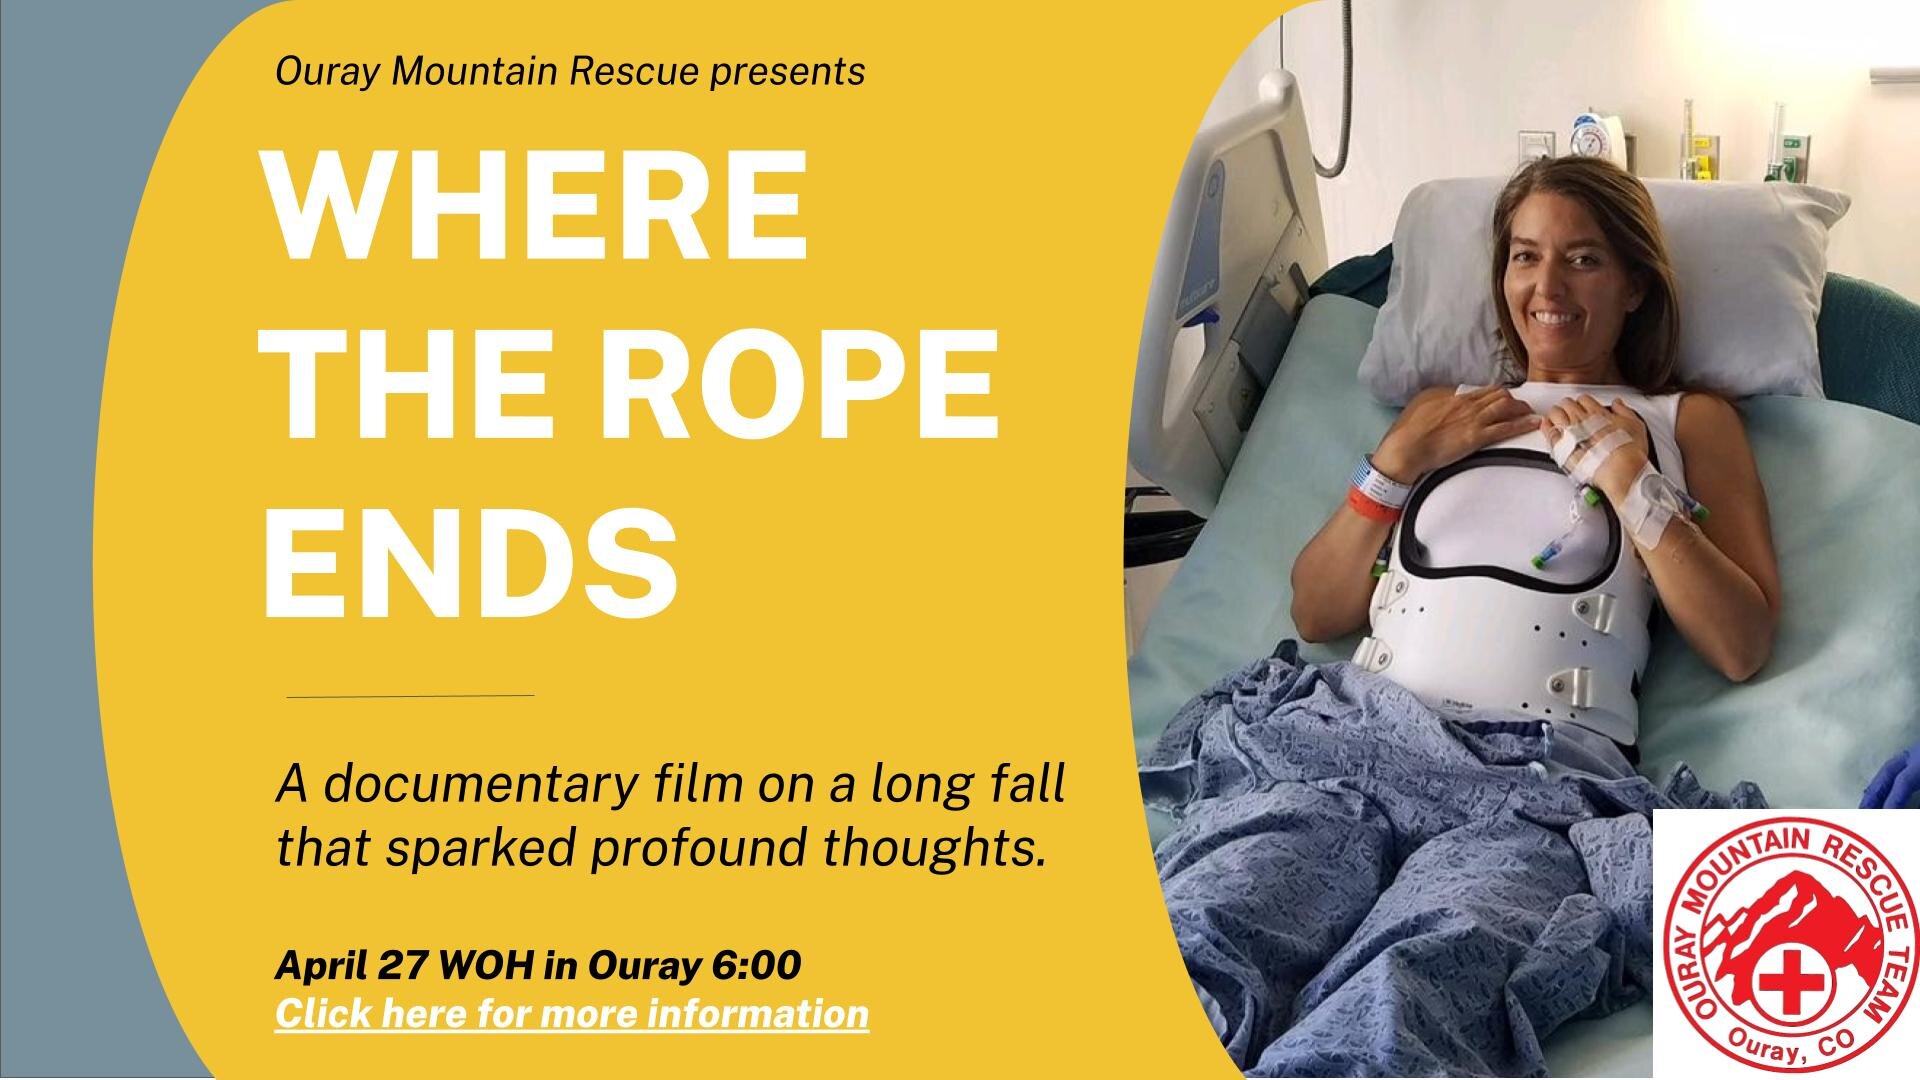 Come out to our screening of Where the Rope Ends on April 27th at the Wright Opera House. Thanks to our sponsors Ouray Mountain Sports  @kamis_samis_ouray @mountaintrip  @basecamp_ouray @noindividualheroes